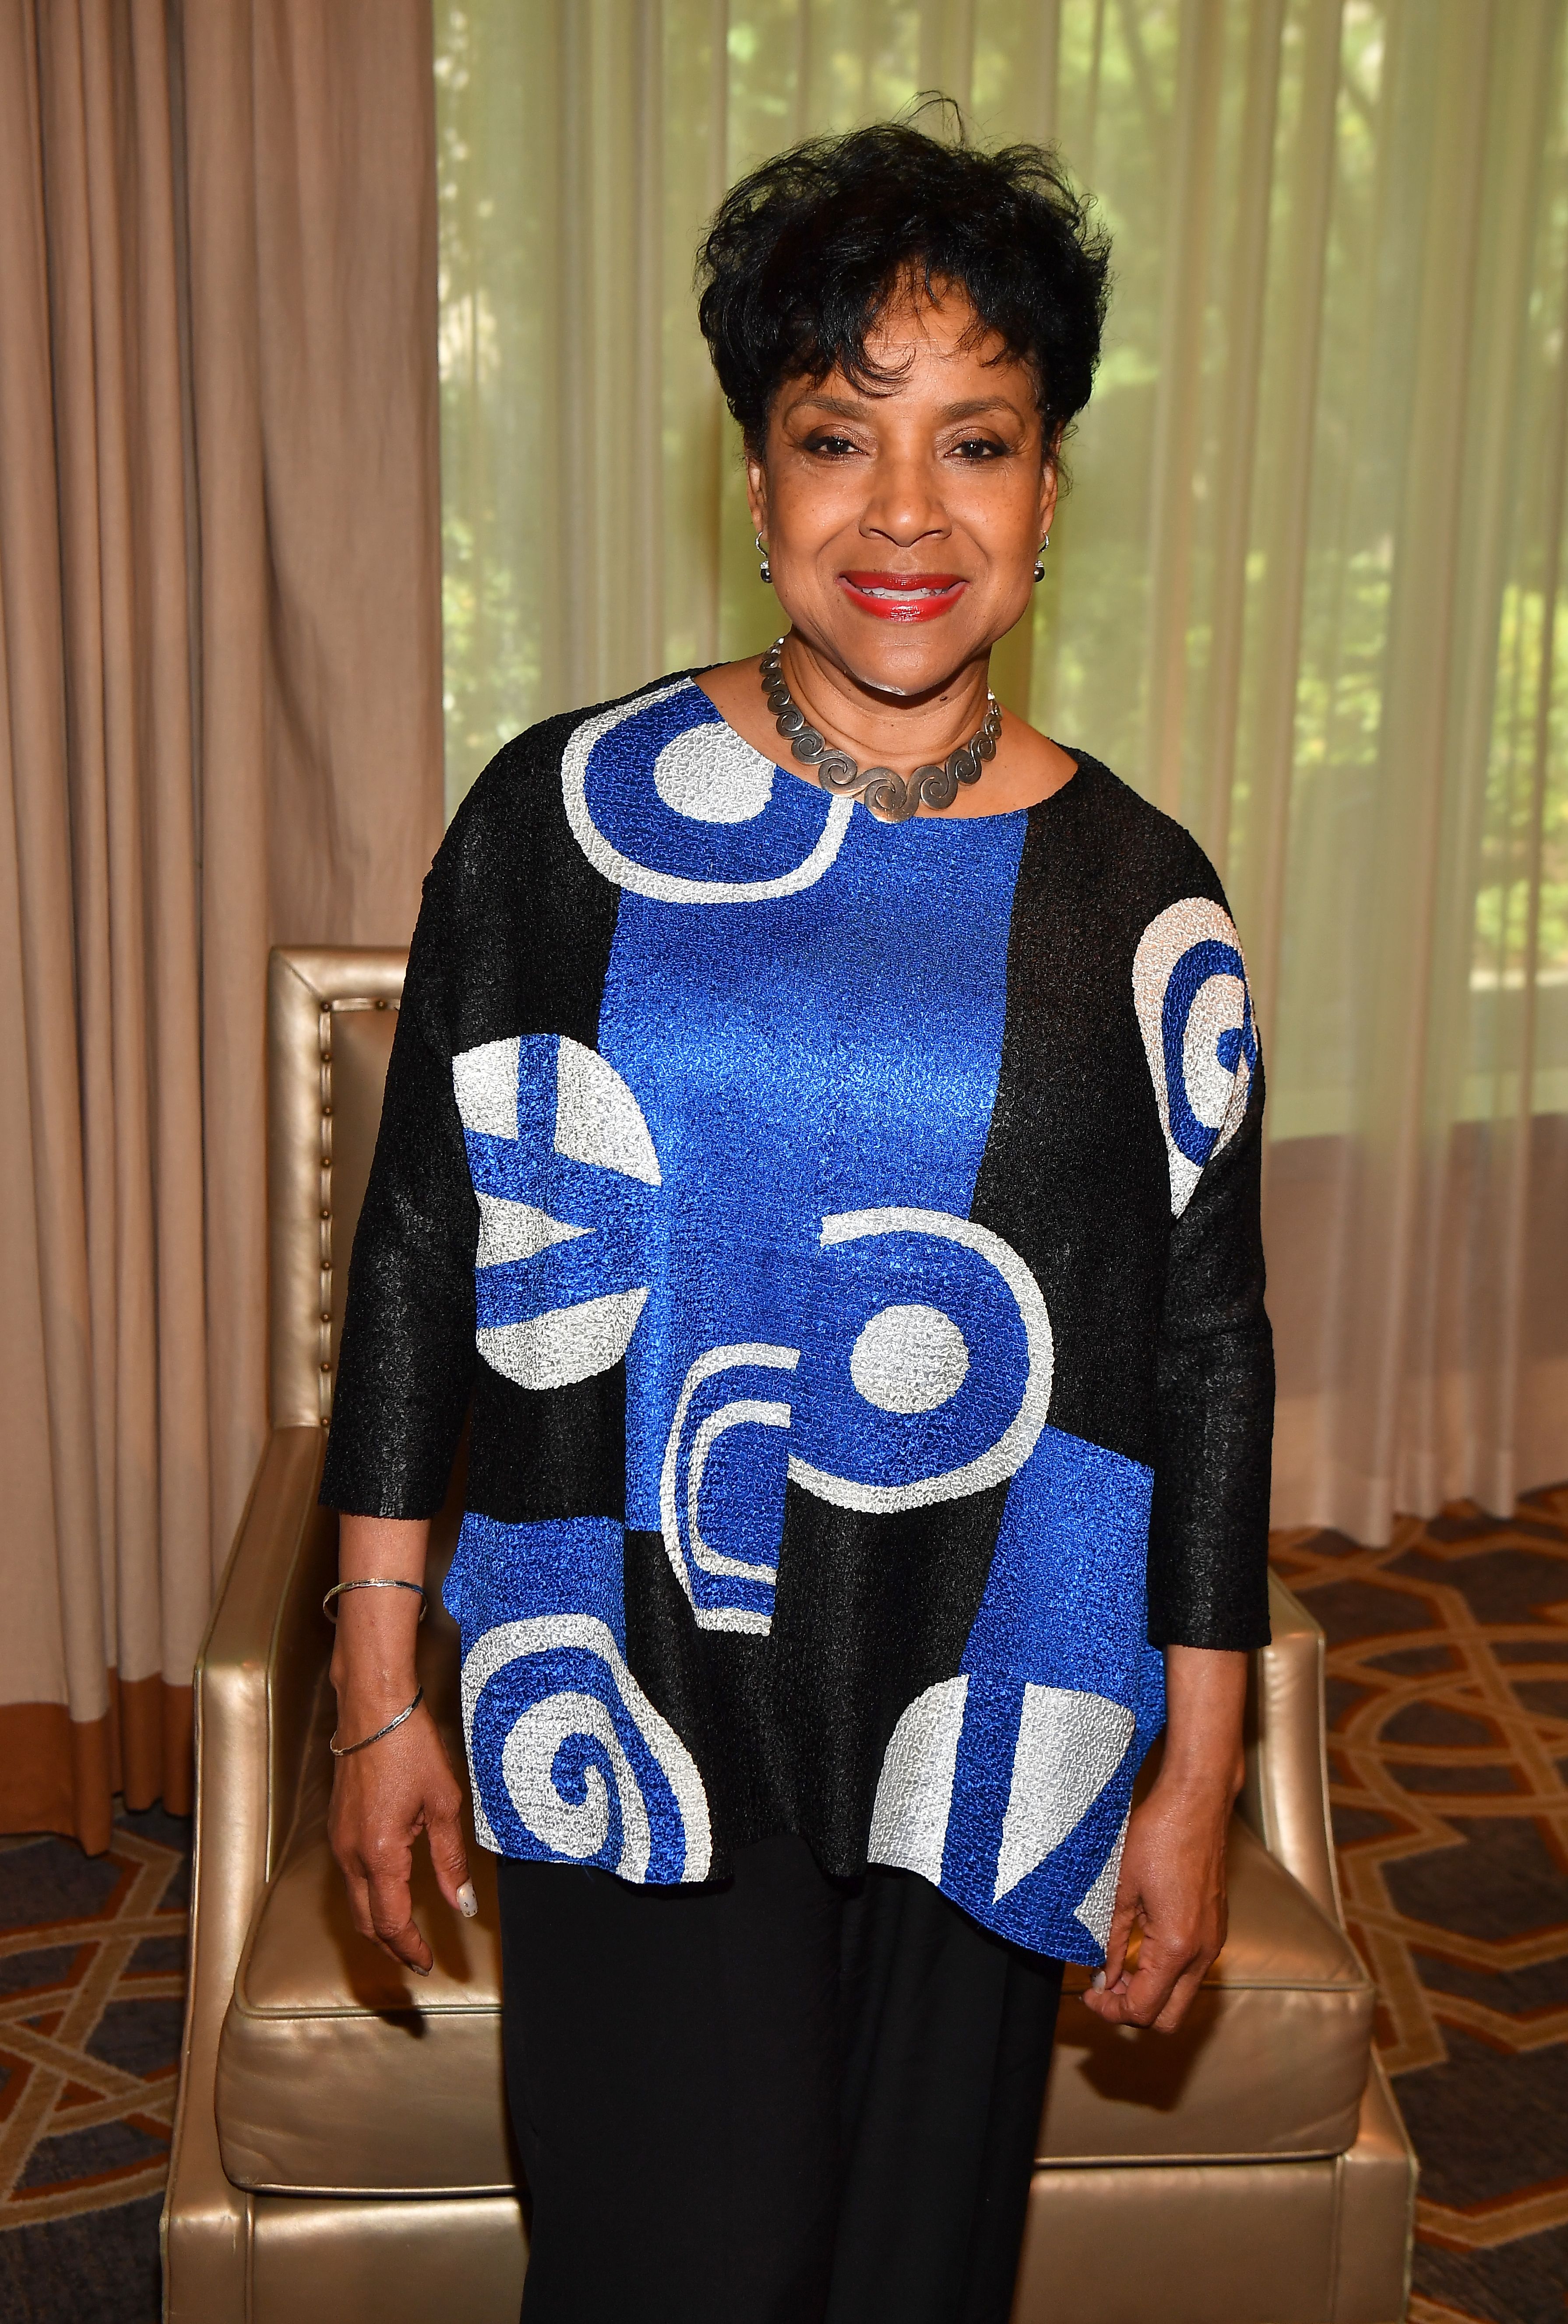 Phylicia Rashad at the True Colors Applauds Awards Brunch on June 01, 2019 in Atlanta. | Photo: Getty Images